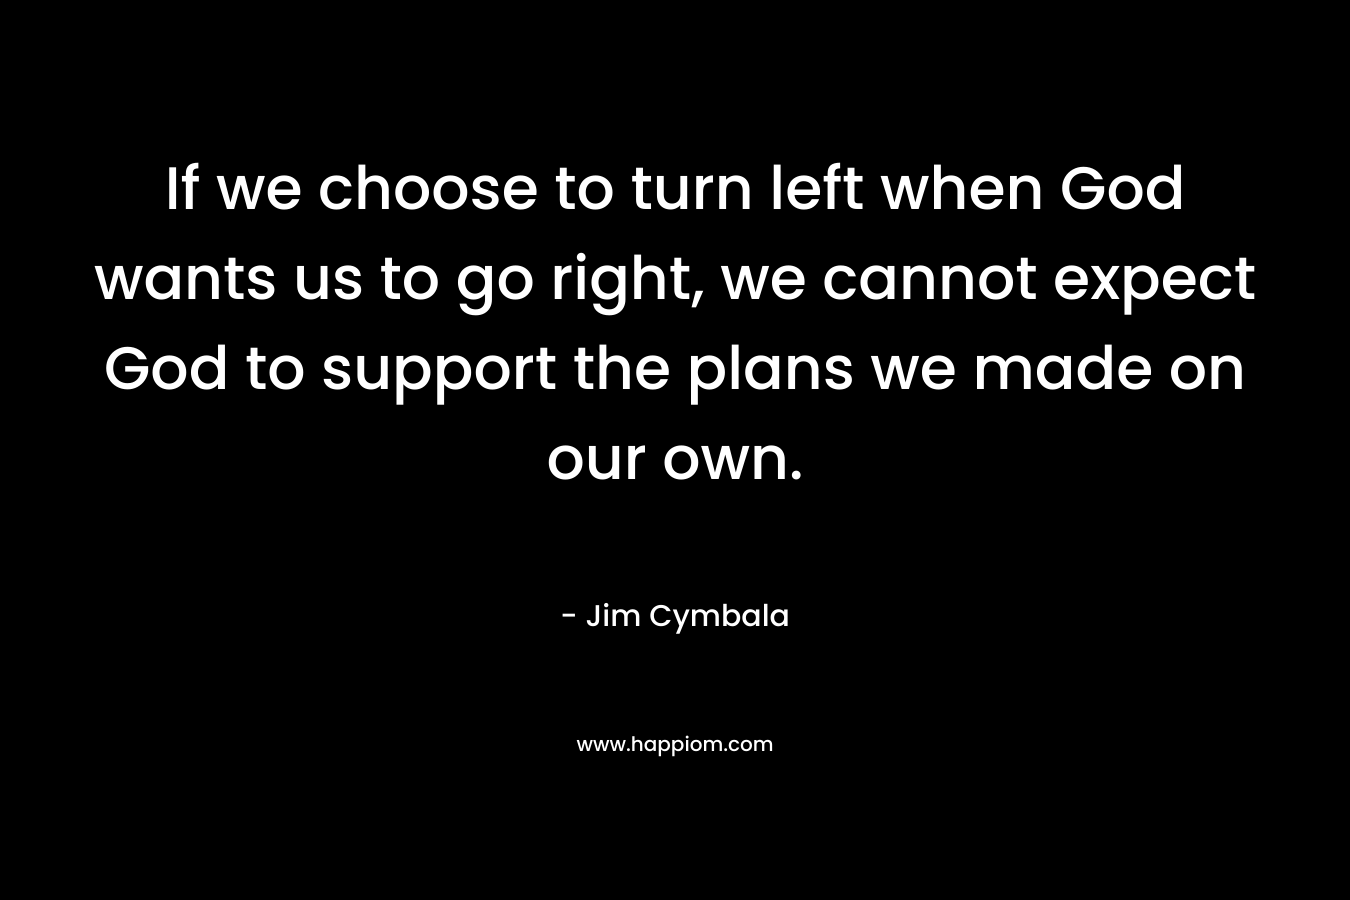 If we choose to turn left when God wants us to go right, we cannot expect God to support the plans we made on our own.